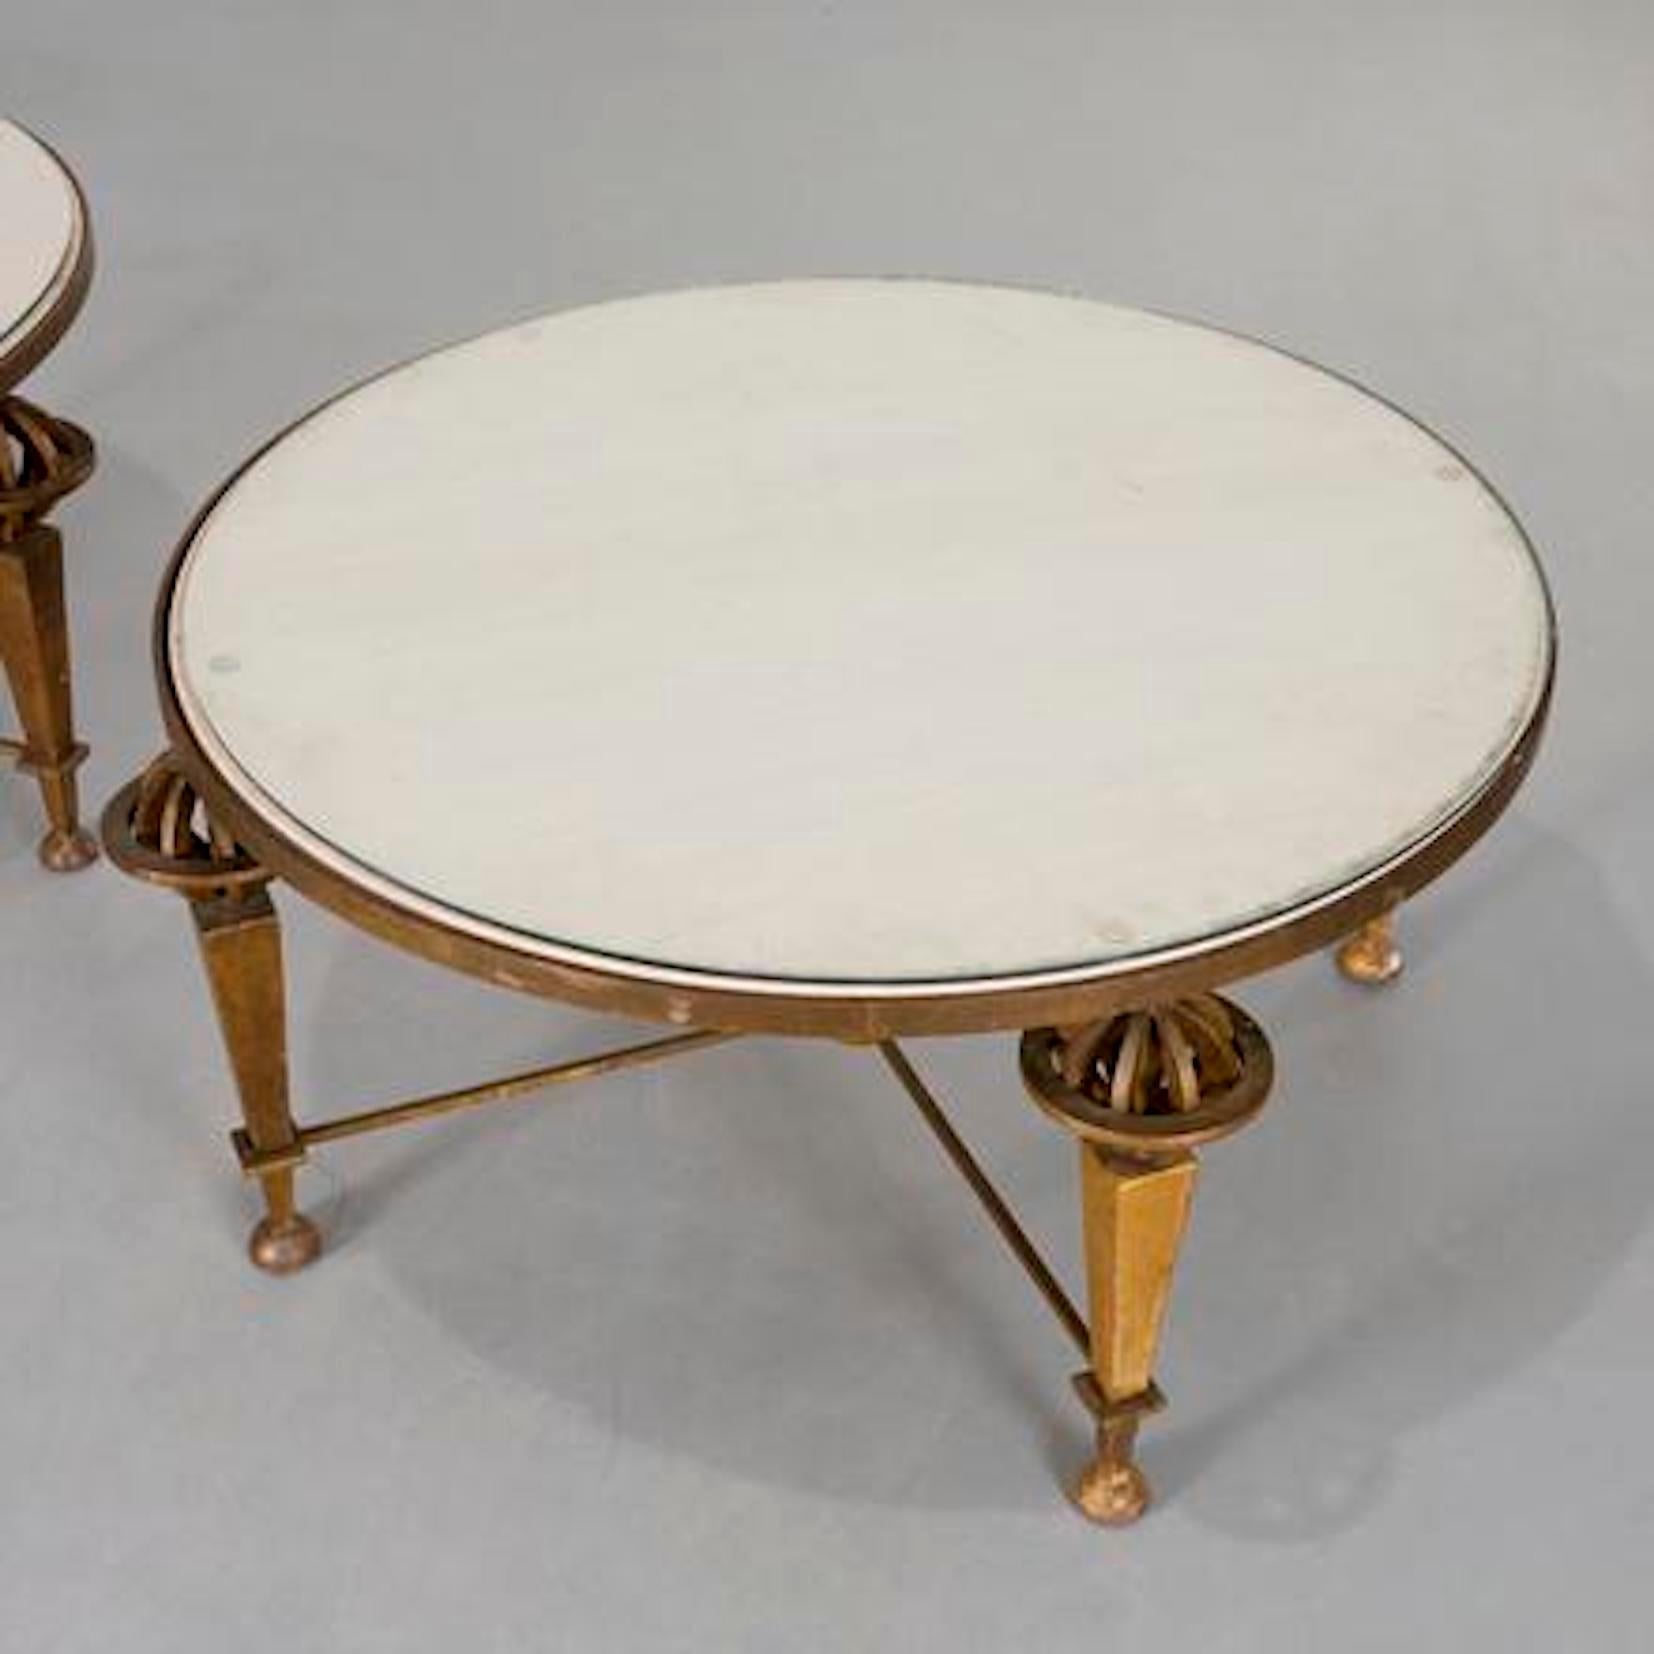 Pair of gilt Iron round low tables  attributed to Gilbert Poillerat  the  tabletops inset with
inset  with glass, raised on four armillary globes above pyramidal legs joined
by stretcher meeting in a central orb, raised on ball feet,